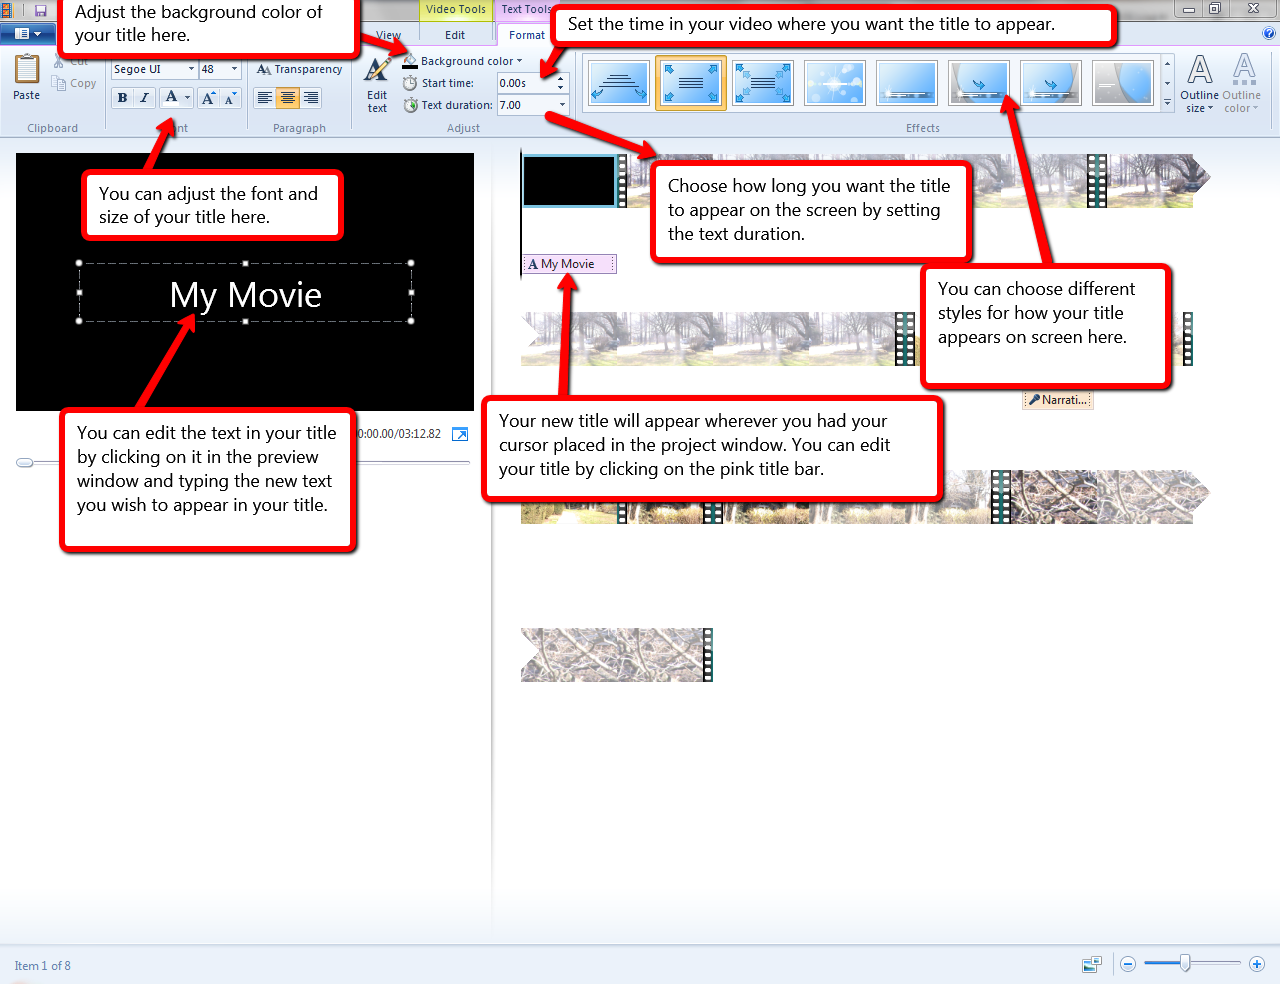 Visual guide to adding titles in Windows MovieMaker step 2.